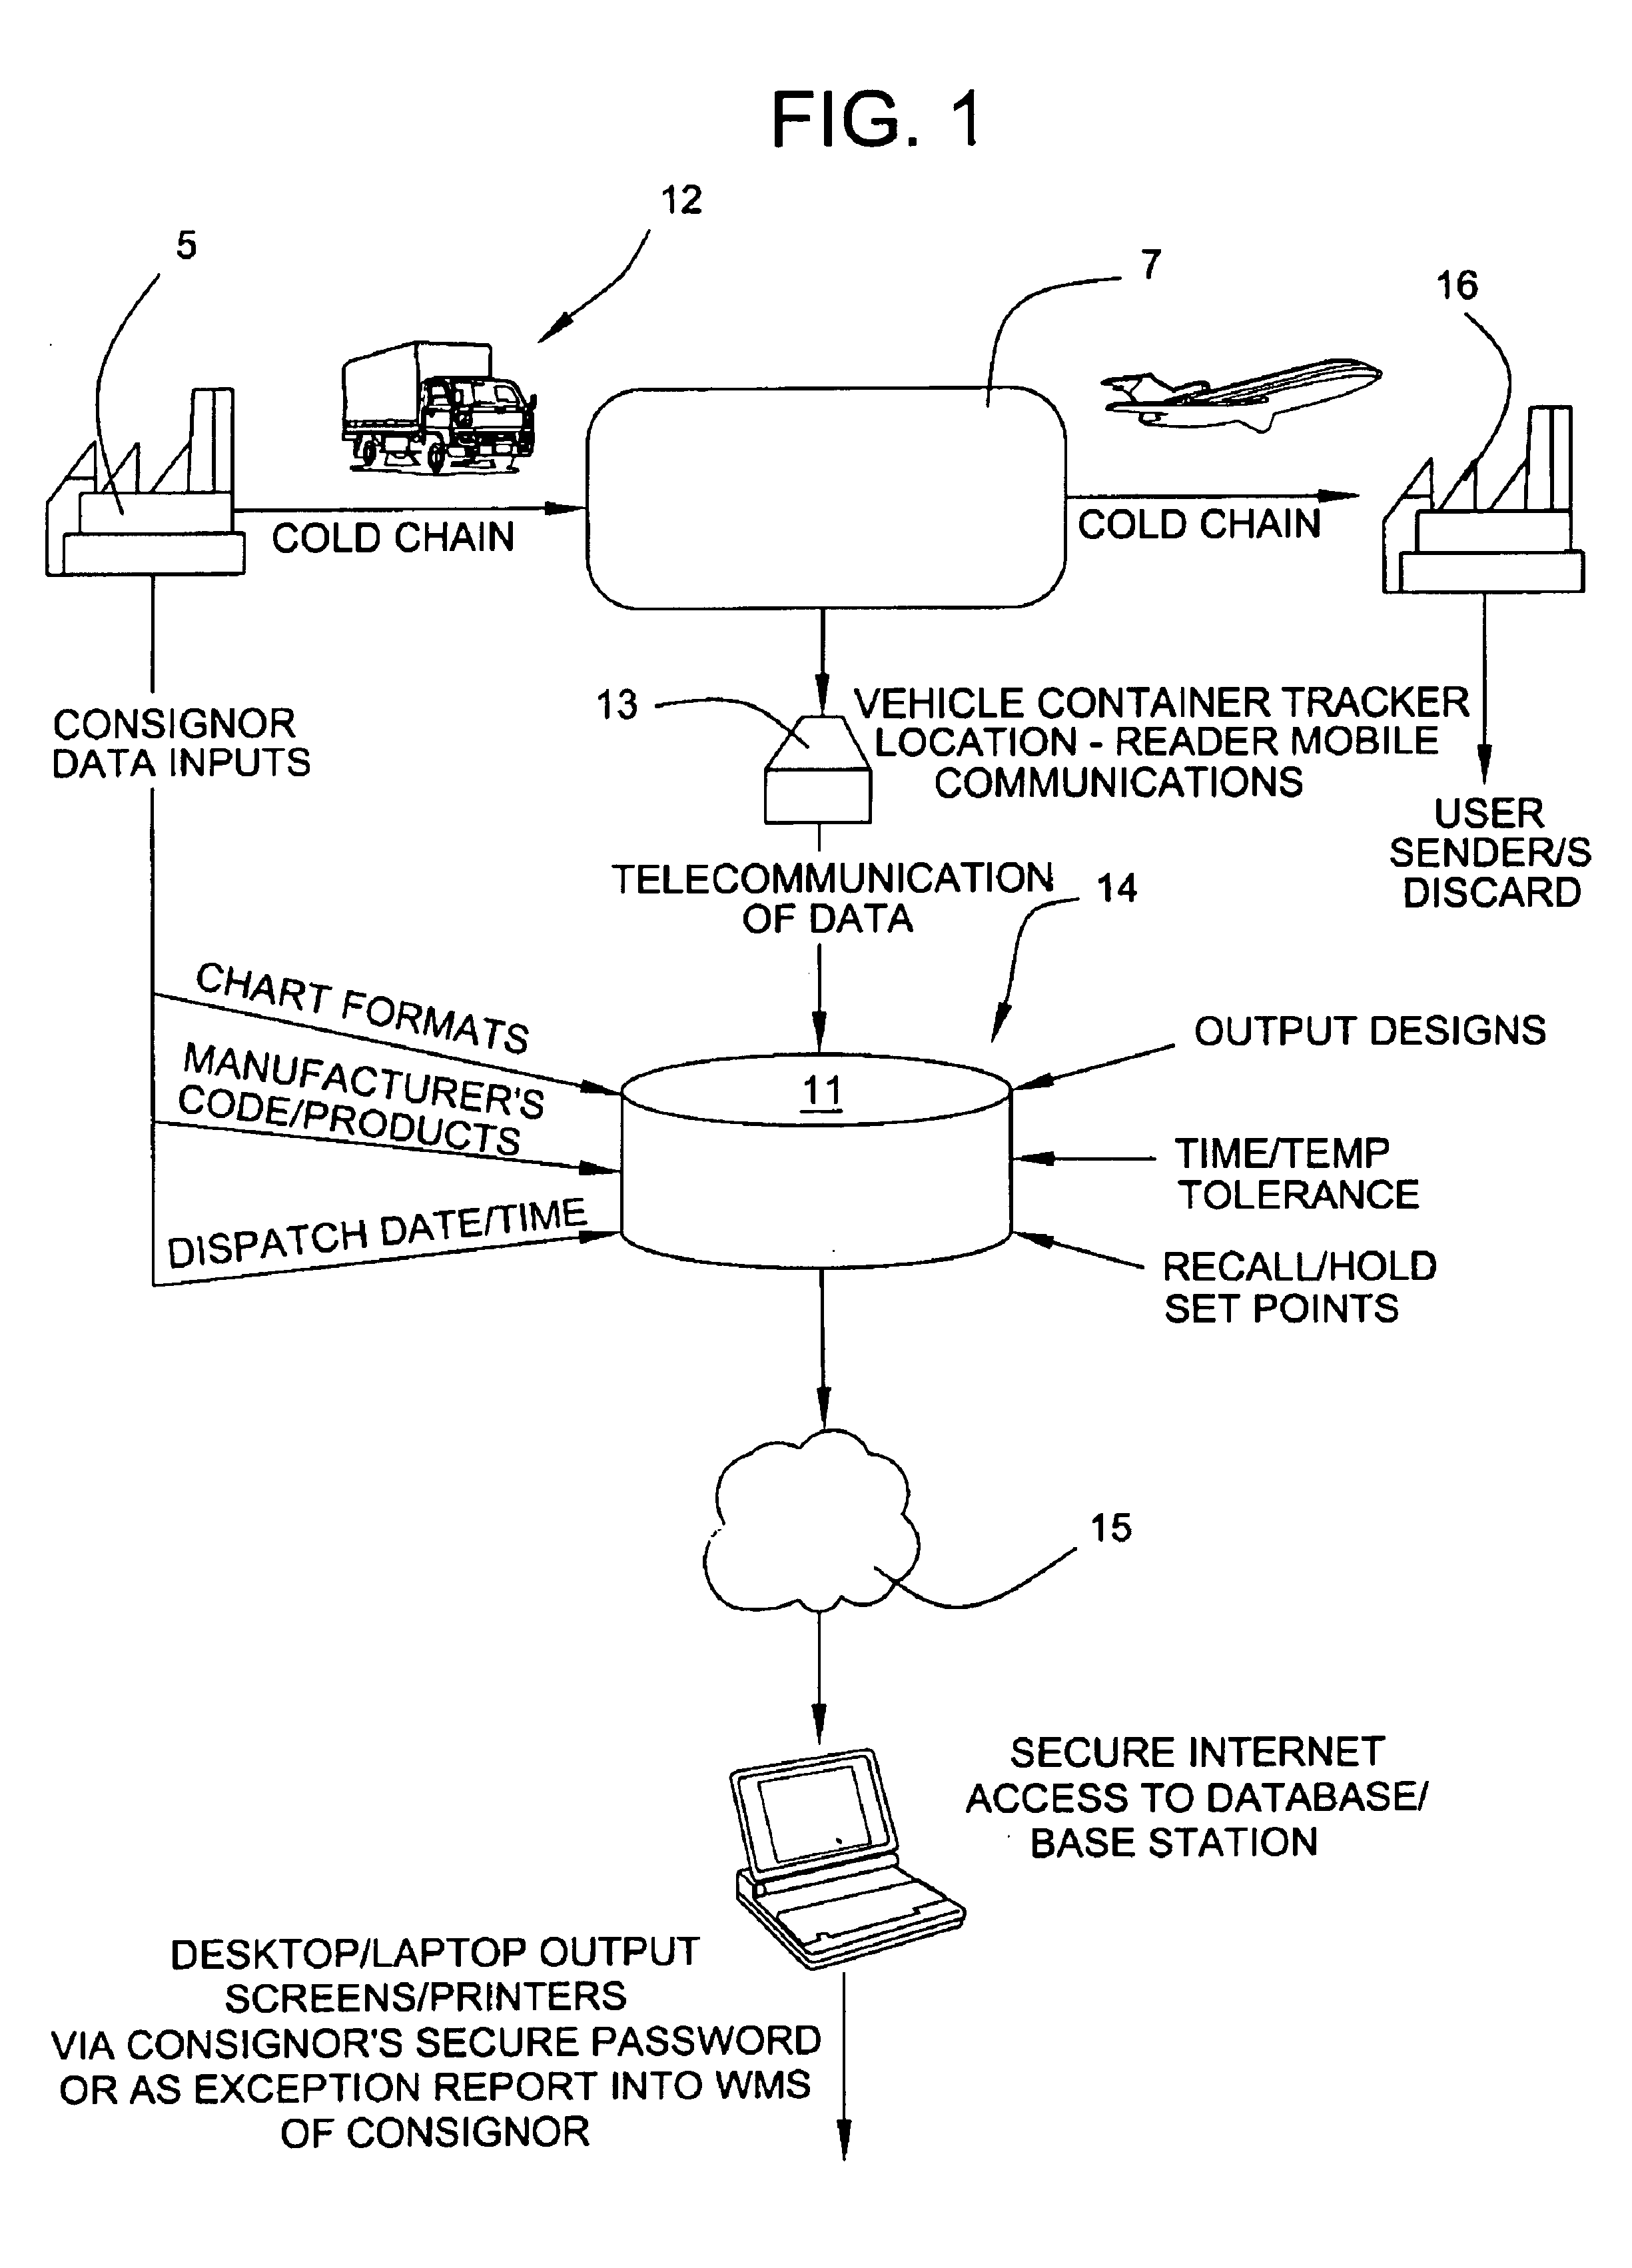 Method of recording the temperature of perishable products in cold chain distribution